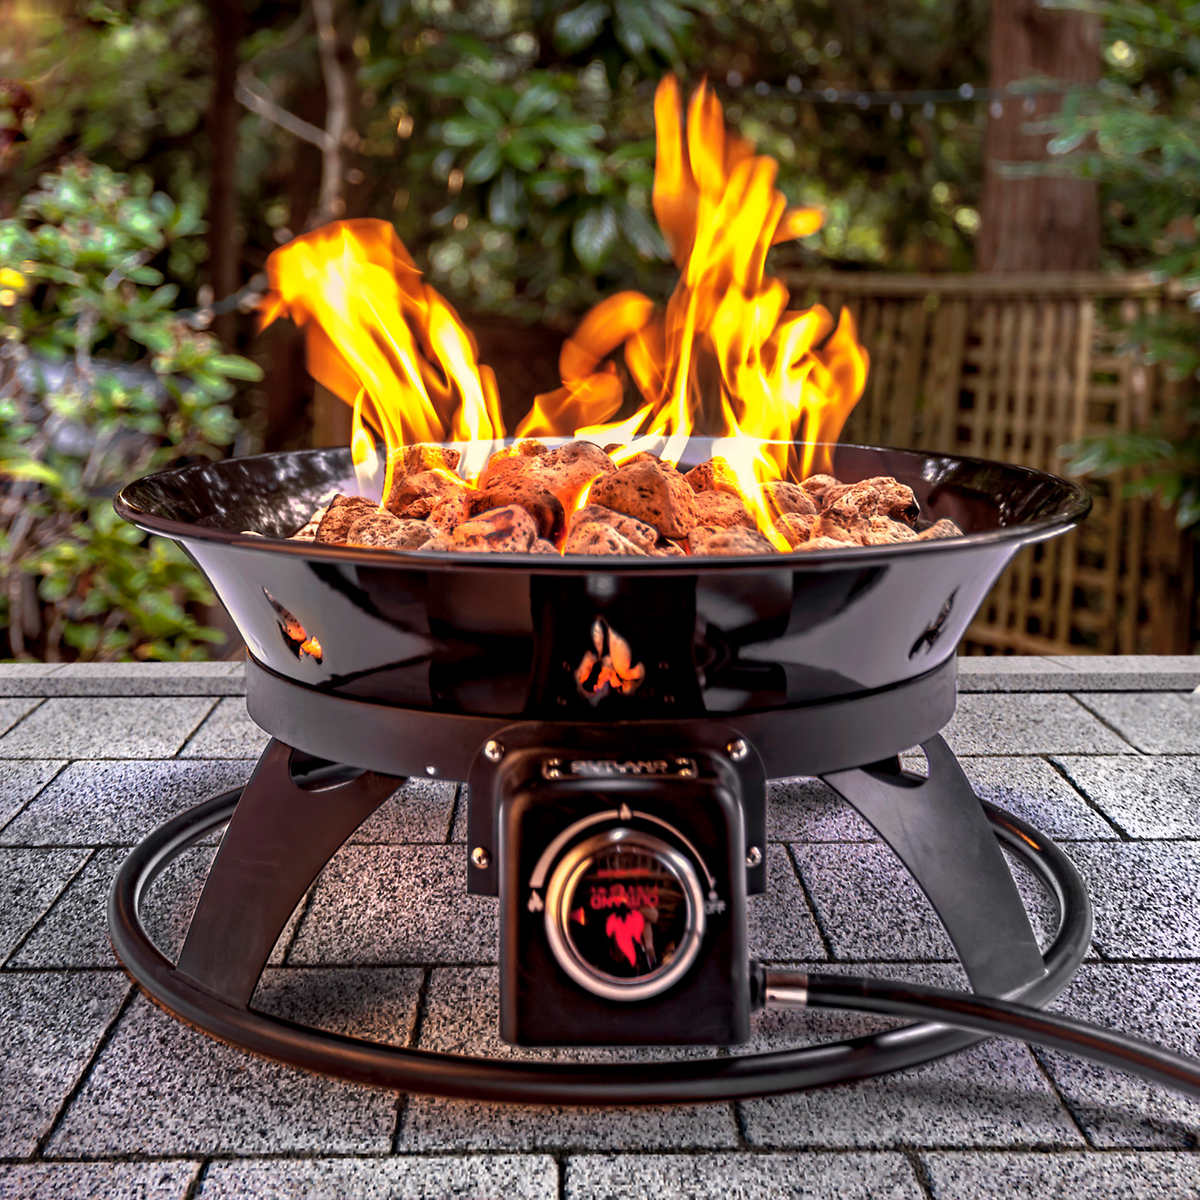 Outland Firebowl Outdoor Firepit Costco, Small Propane Fire Pits